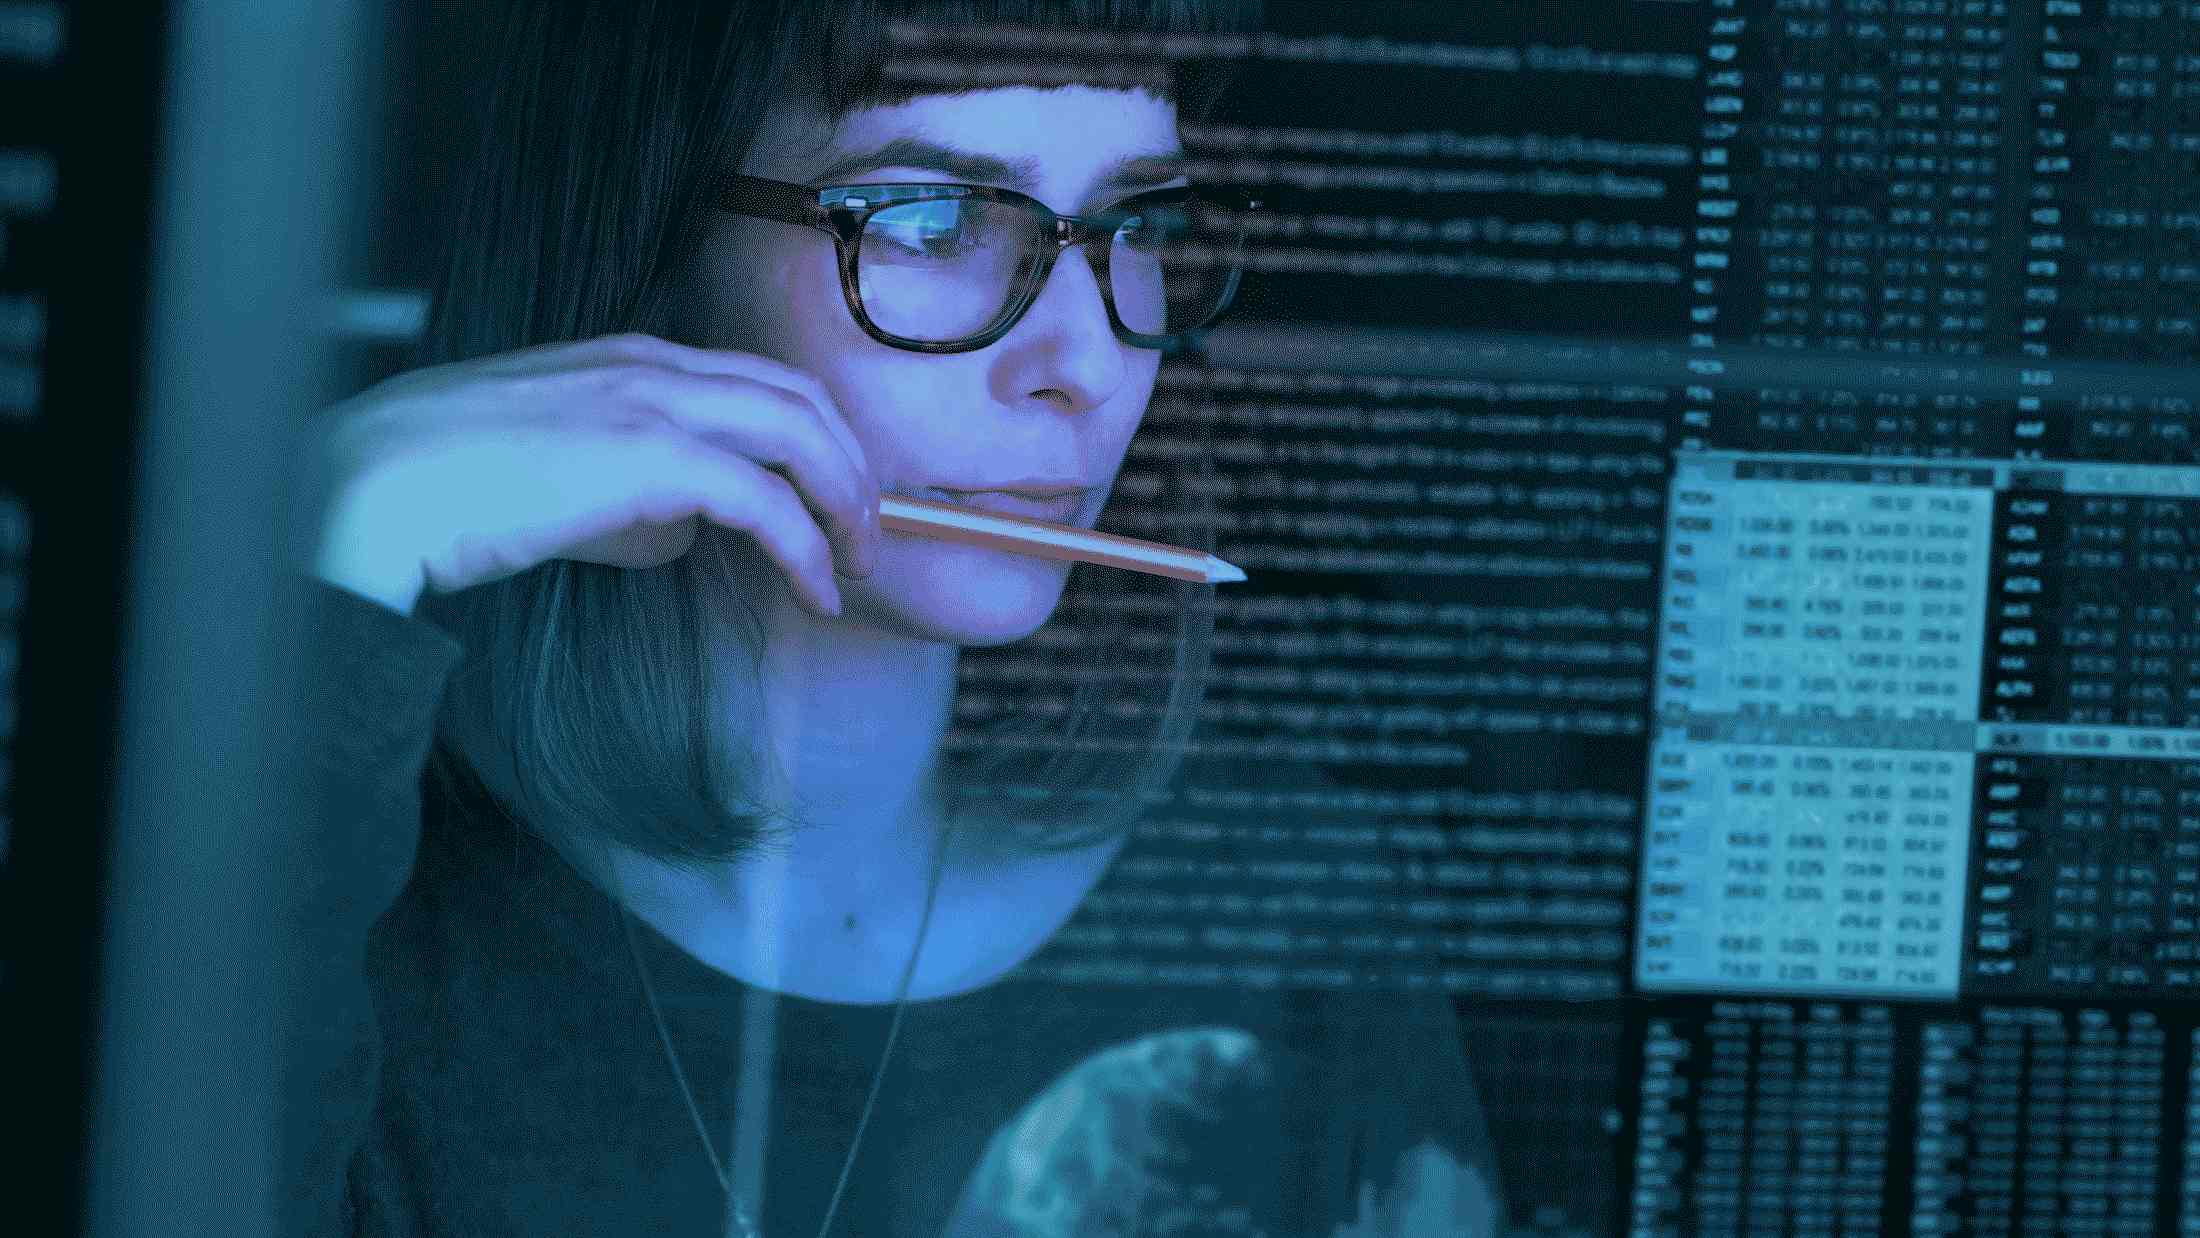 Woman looking at data on a computer screen